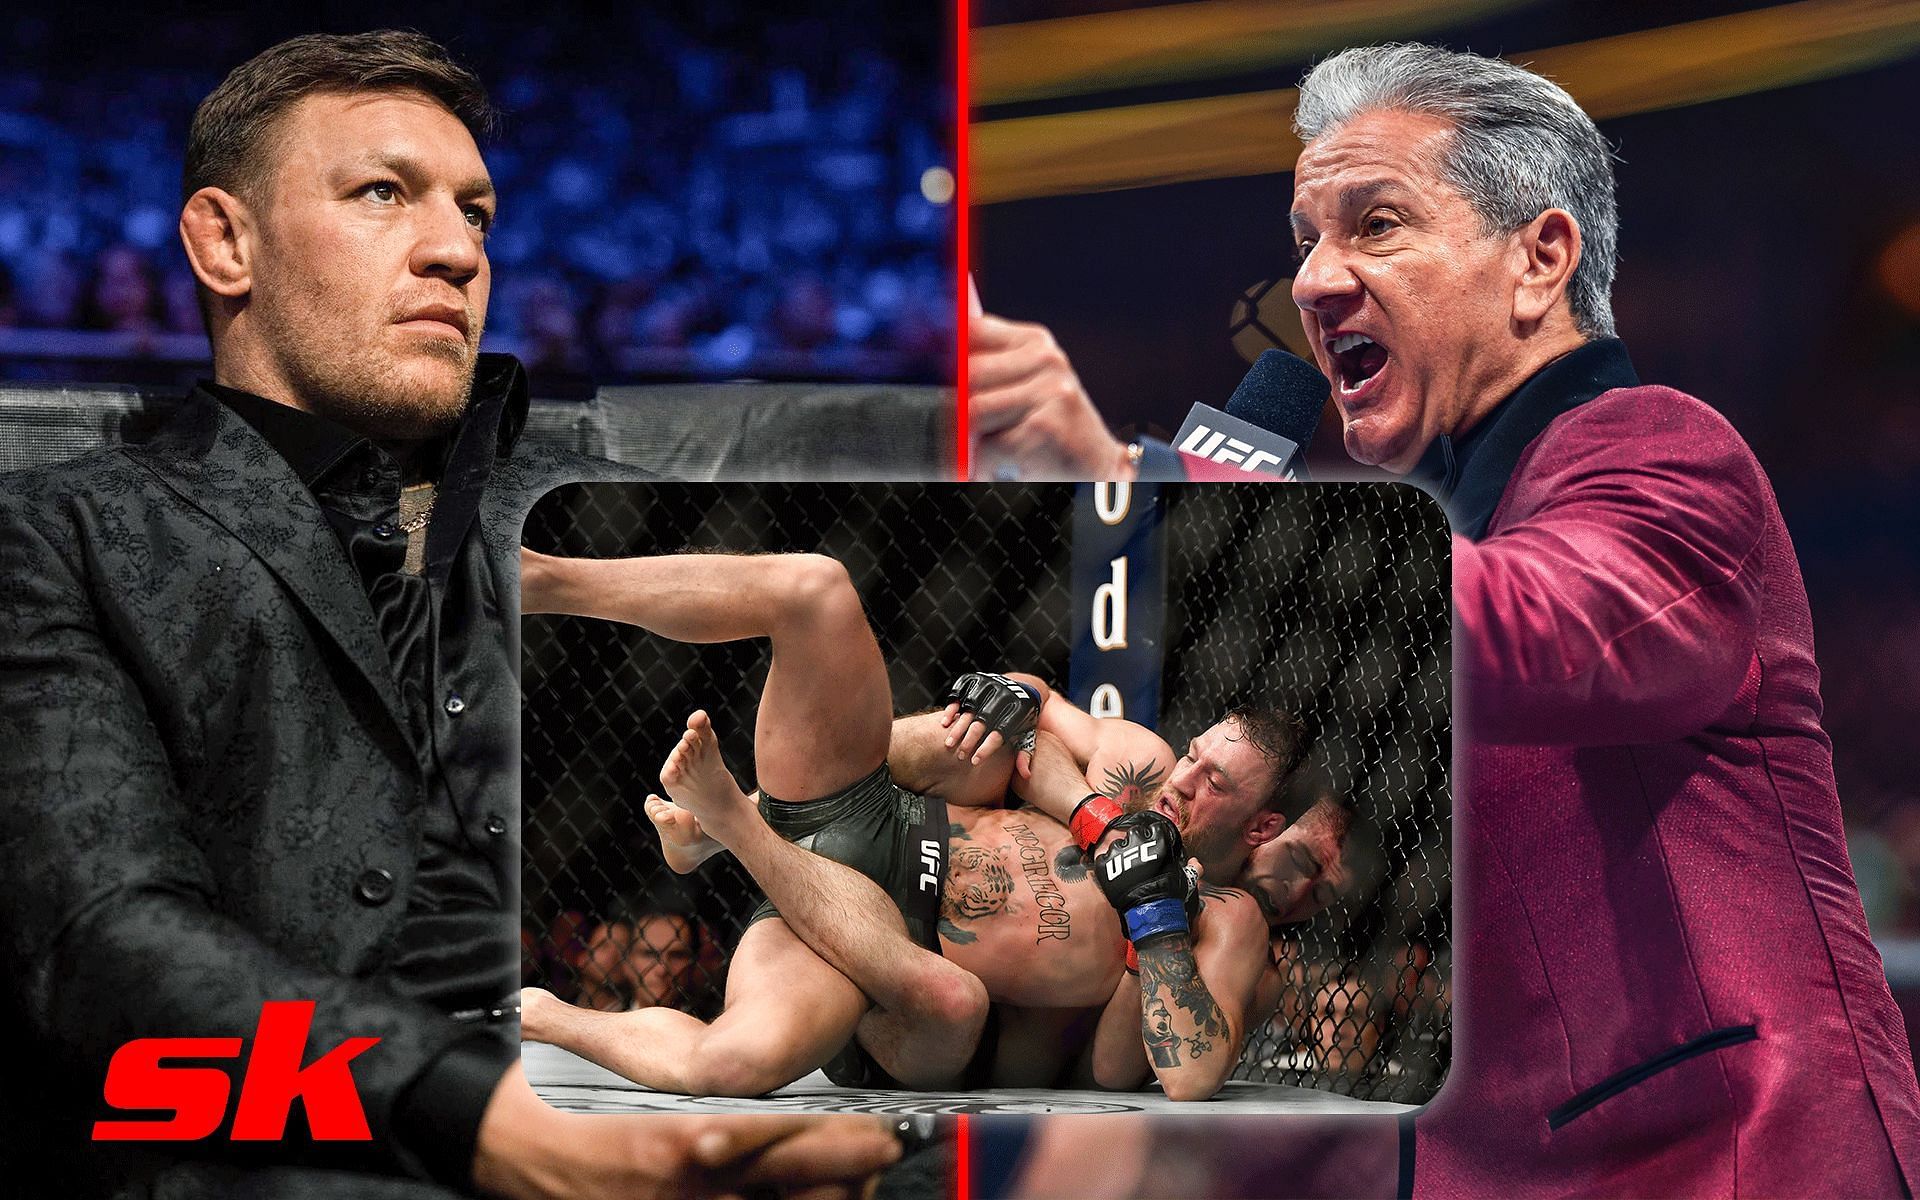 Conor McGregor (left), vs Khabib Nurmagomedov (inset), and Bruce Buffer (right). [left image via Instagram @thenotoriousmma and the rest from Getty Images]